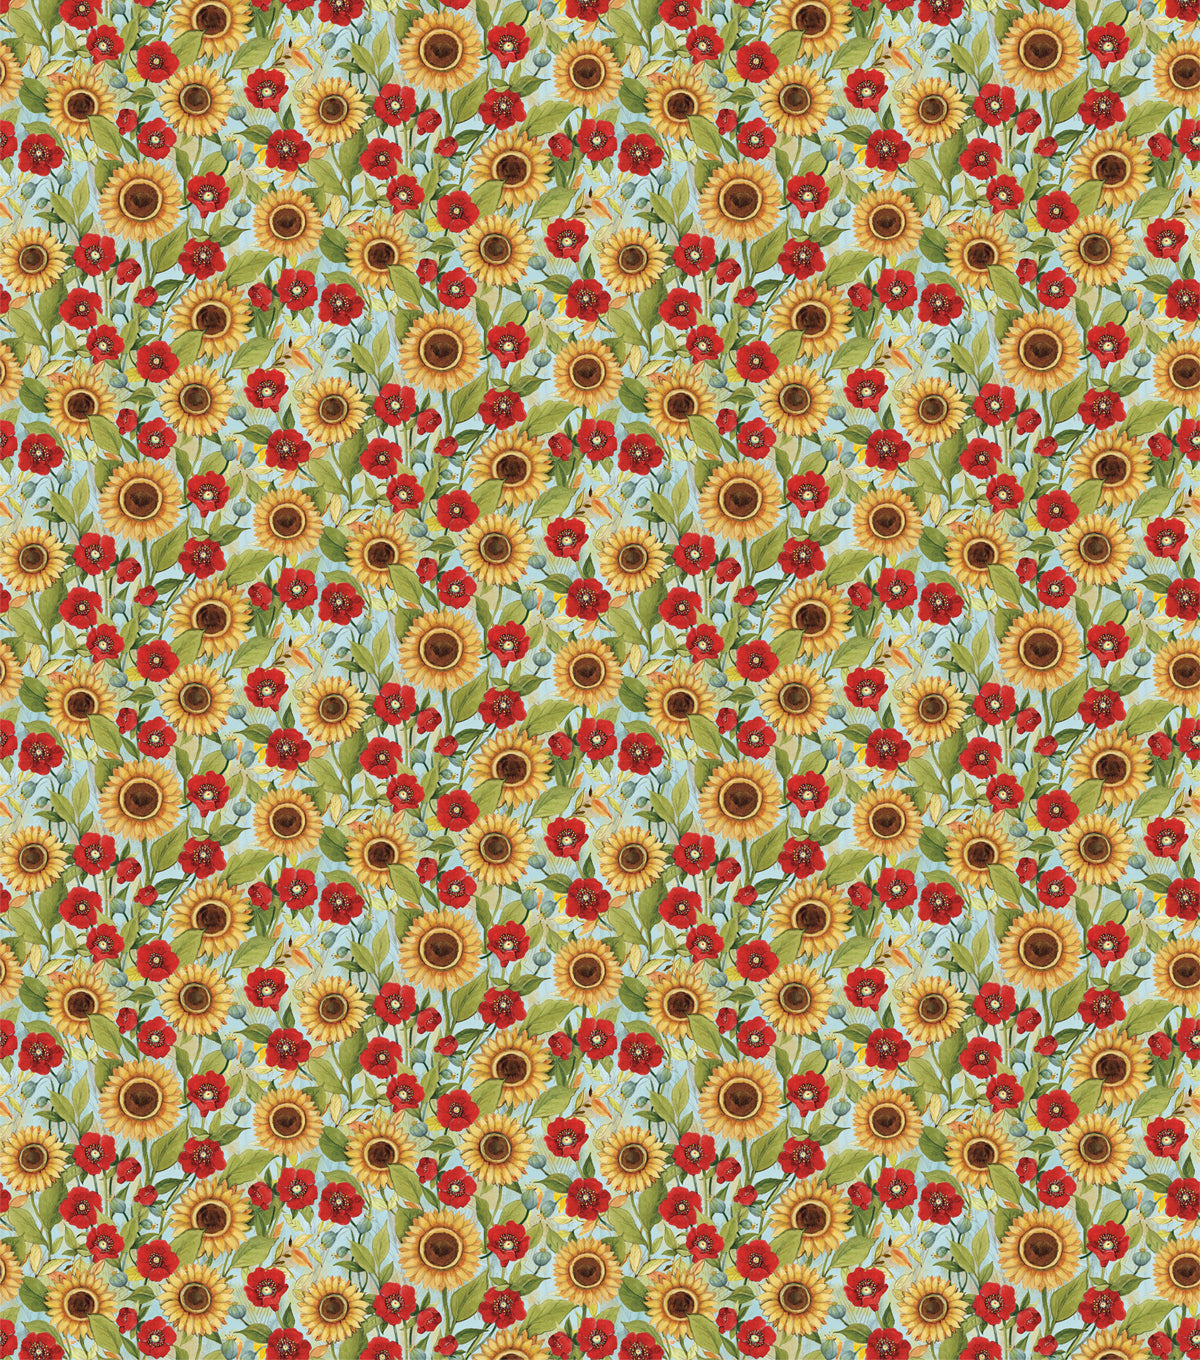 Red Trucks and Bicycles Florals and Sunflowers Cotton Fabric